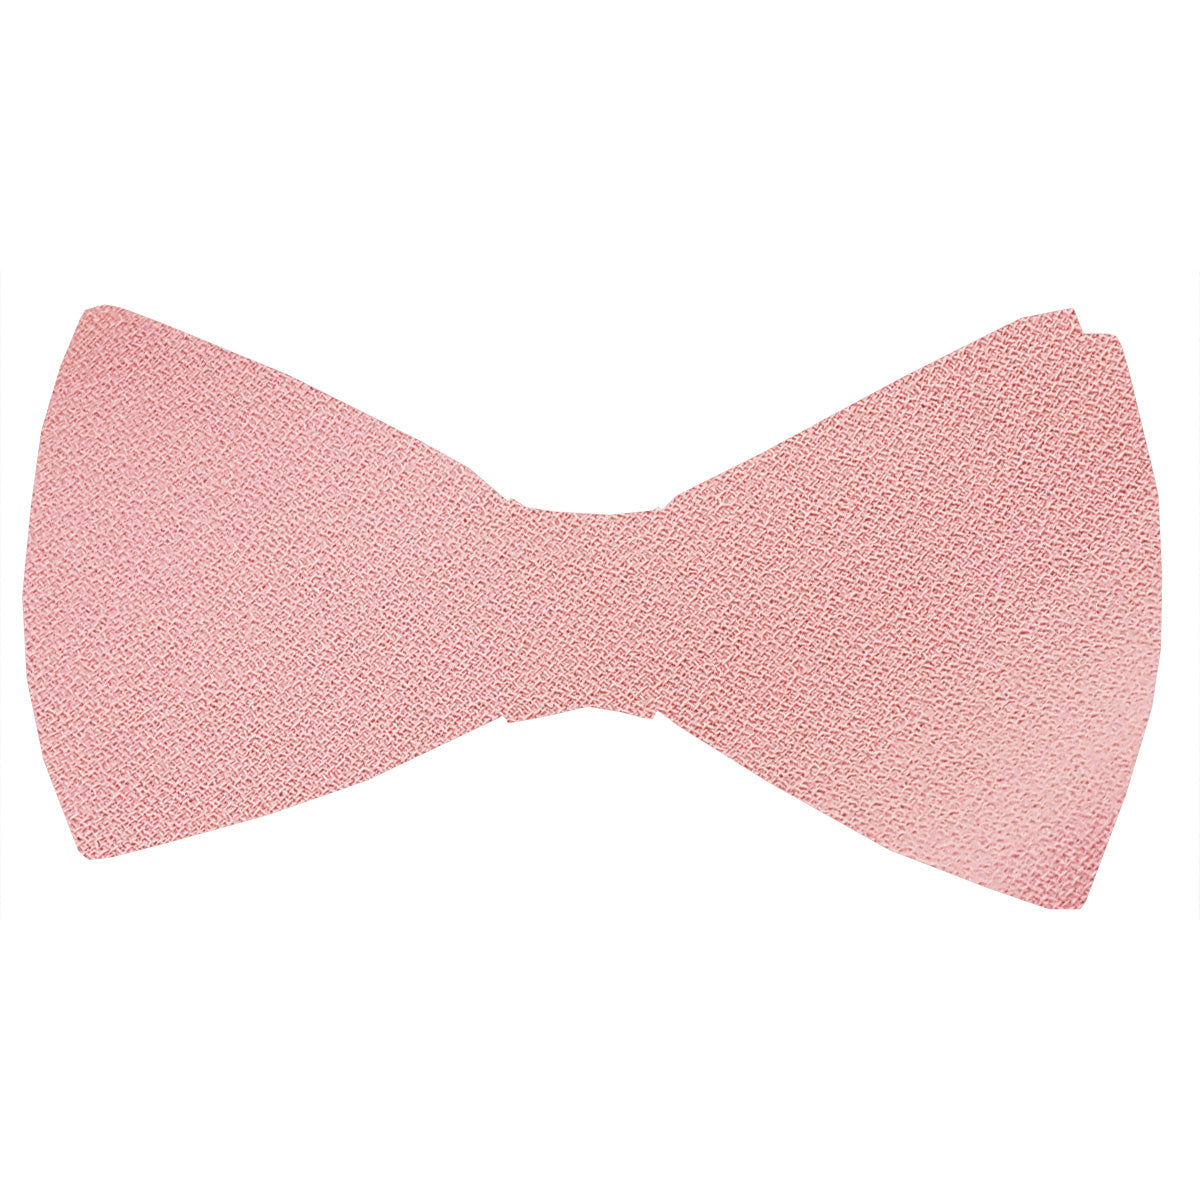 Carnation Pink Bow Ties